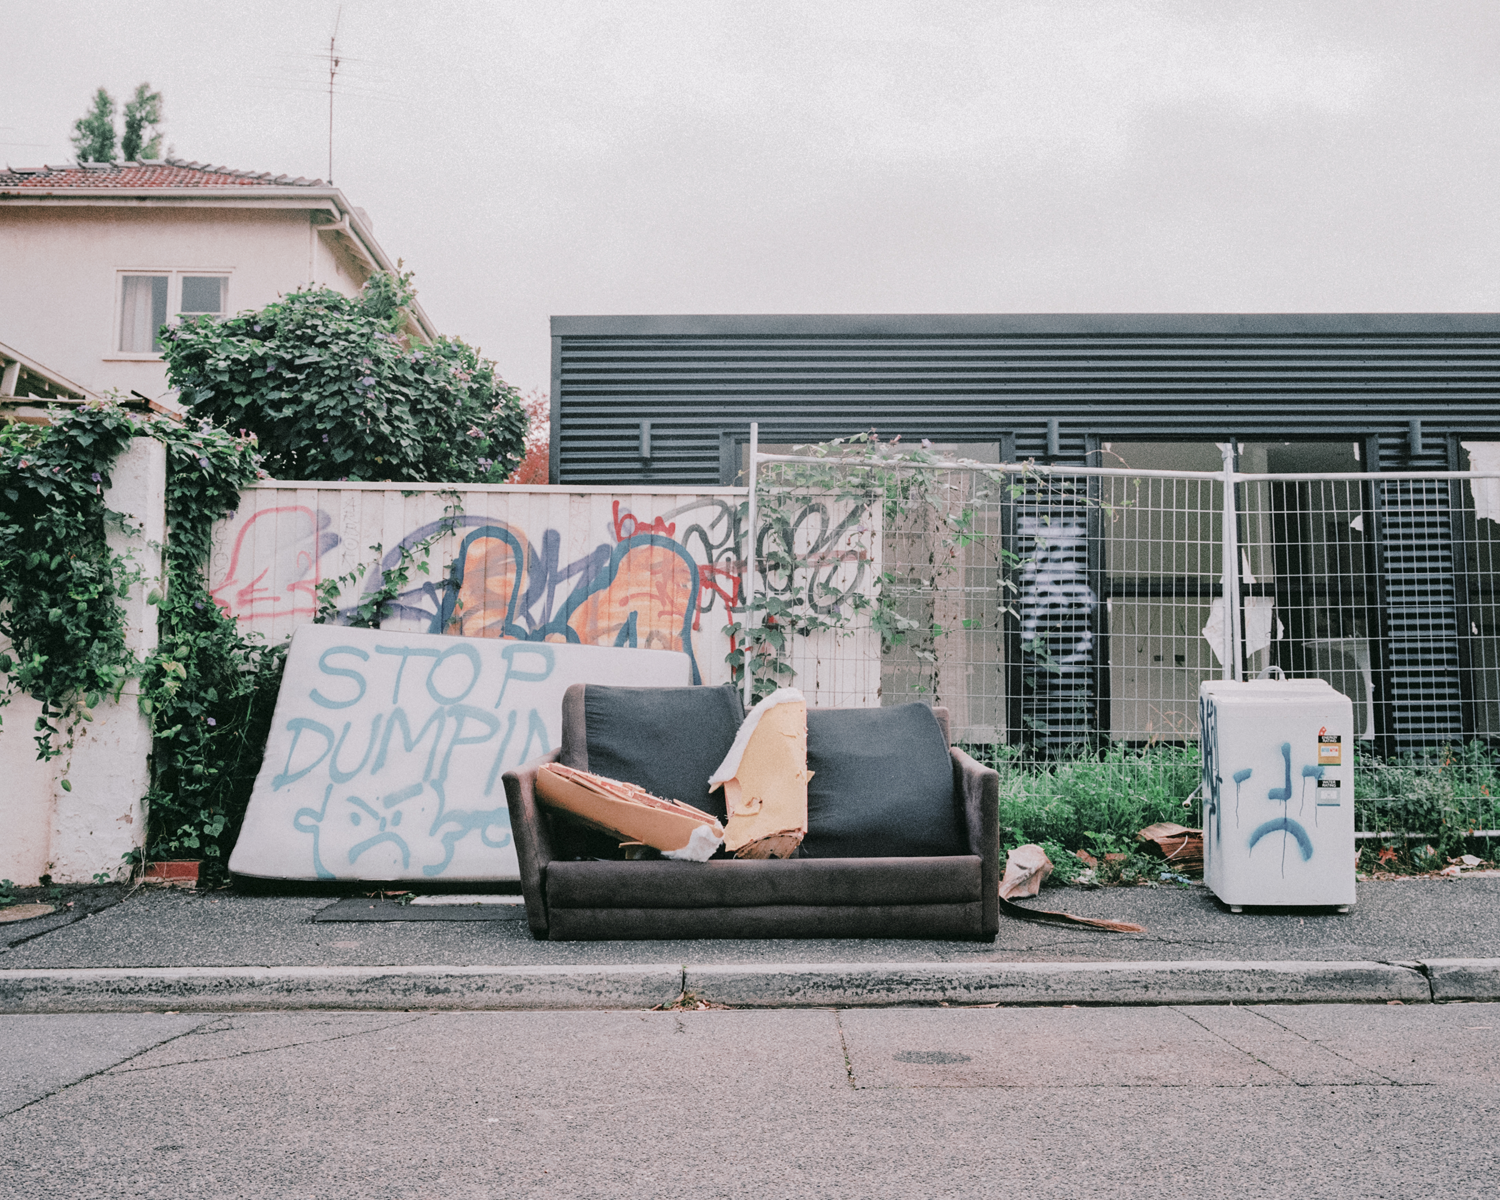 Colour photograph depicting a destroyed couch left on footpath.